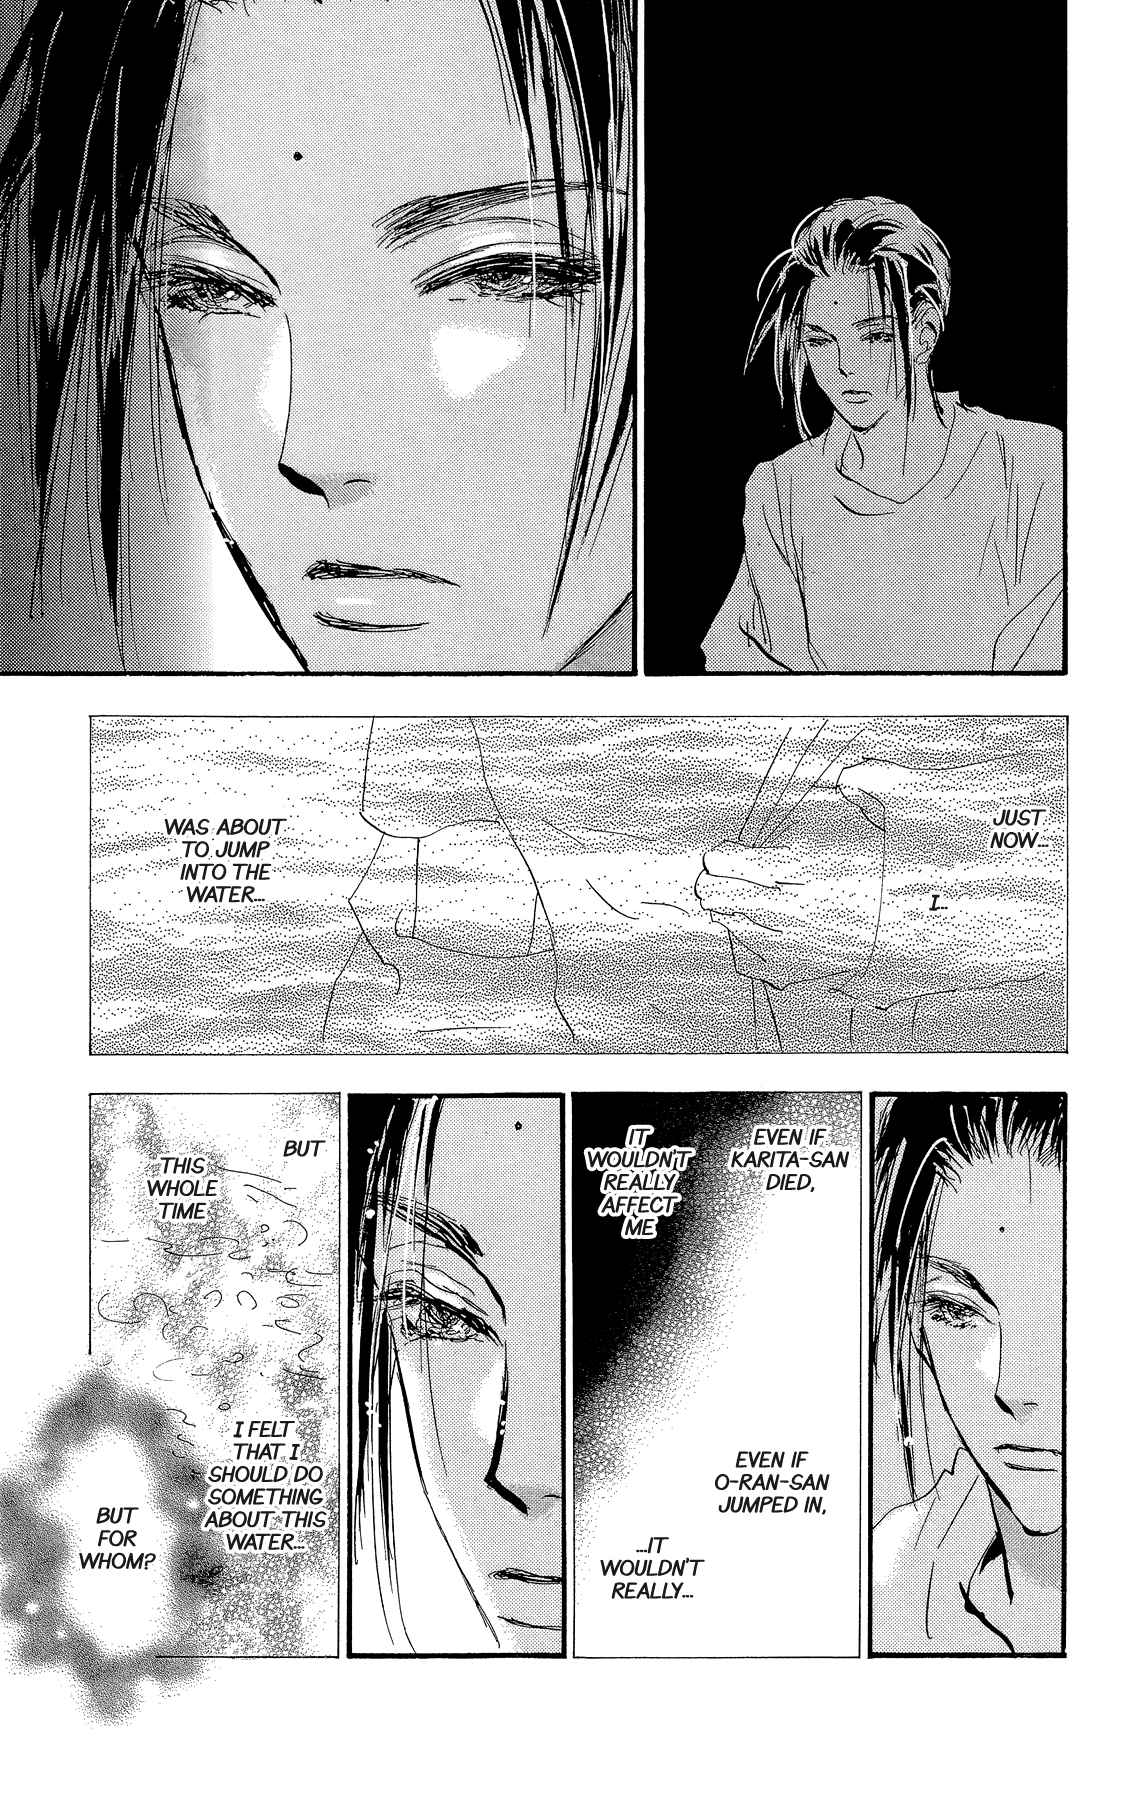 7 Seeds Vol. 31 Ch. 157 Mountains Chapter 22 [Level 1]